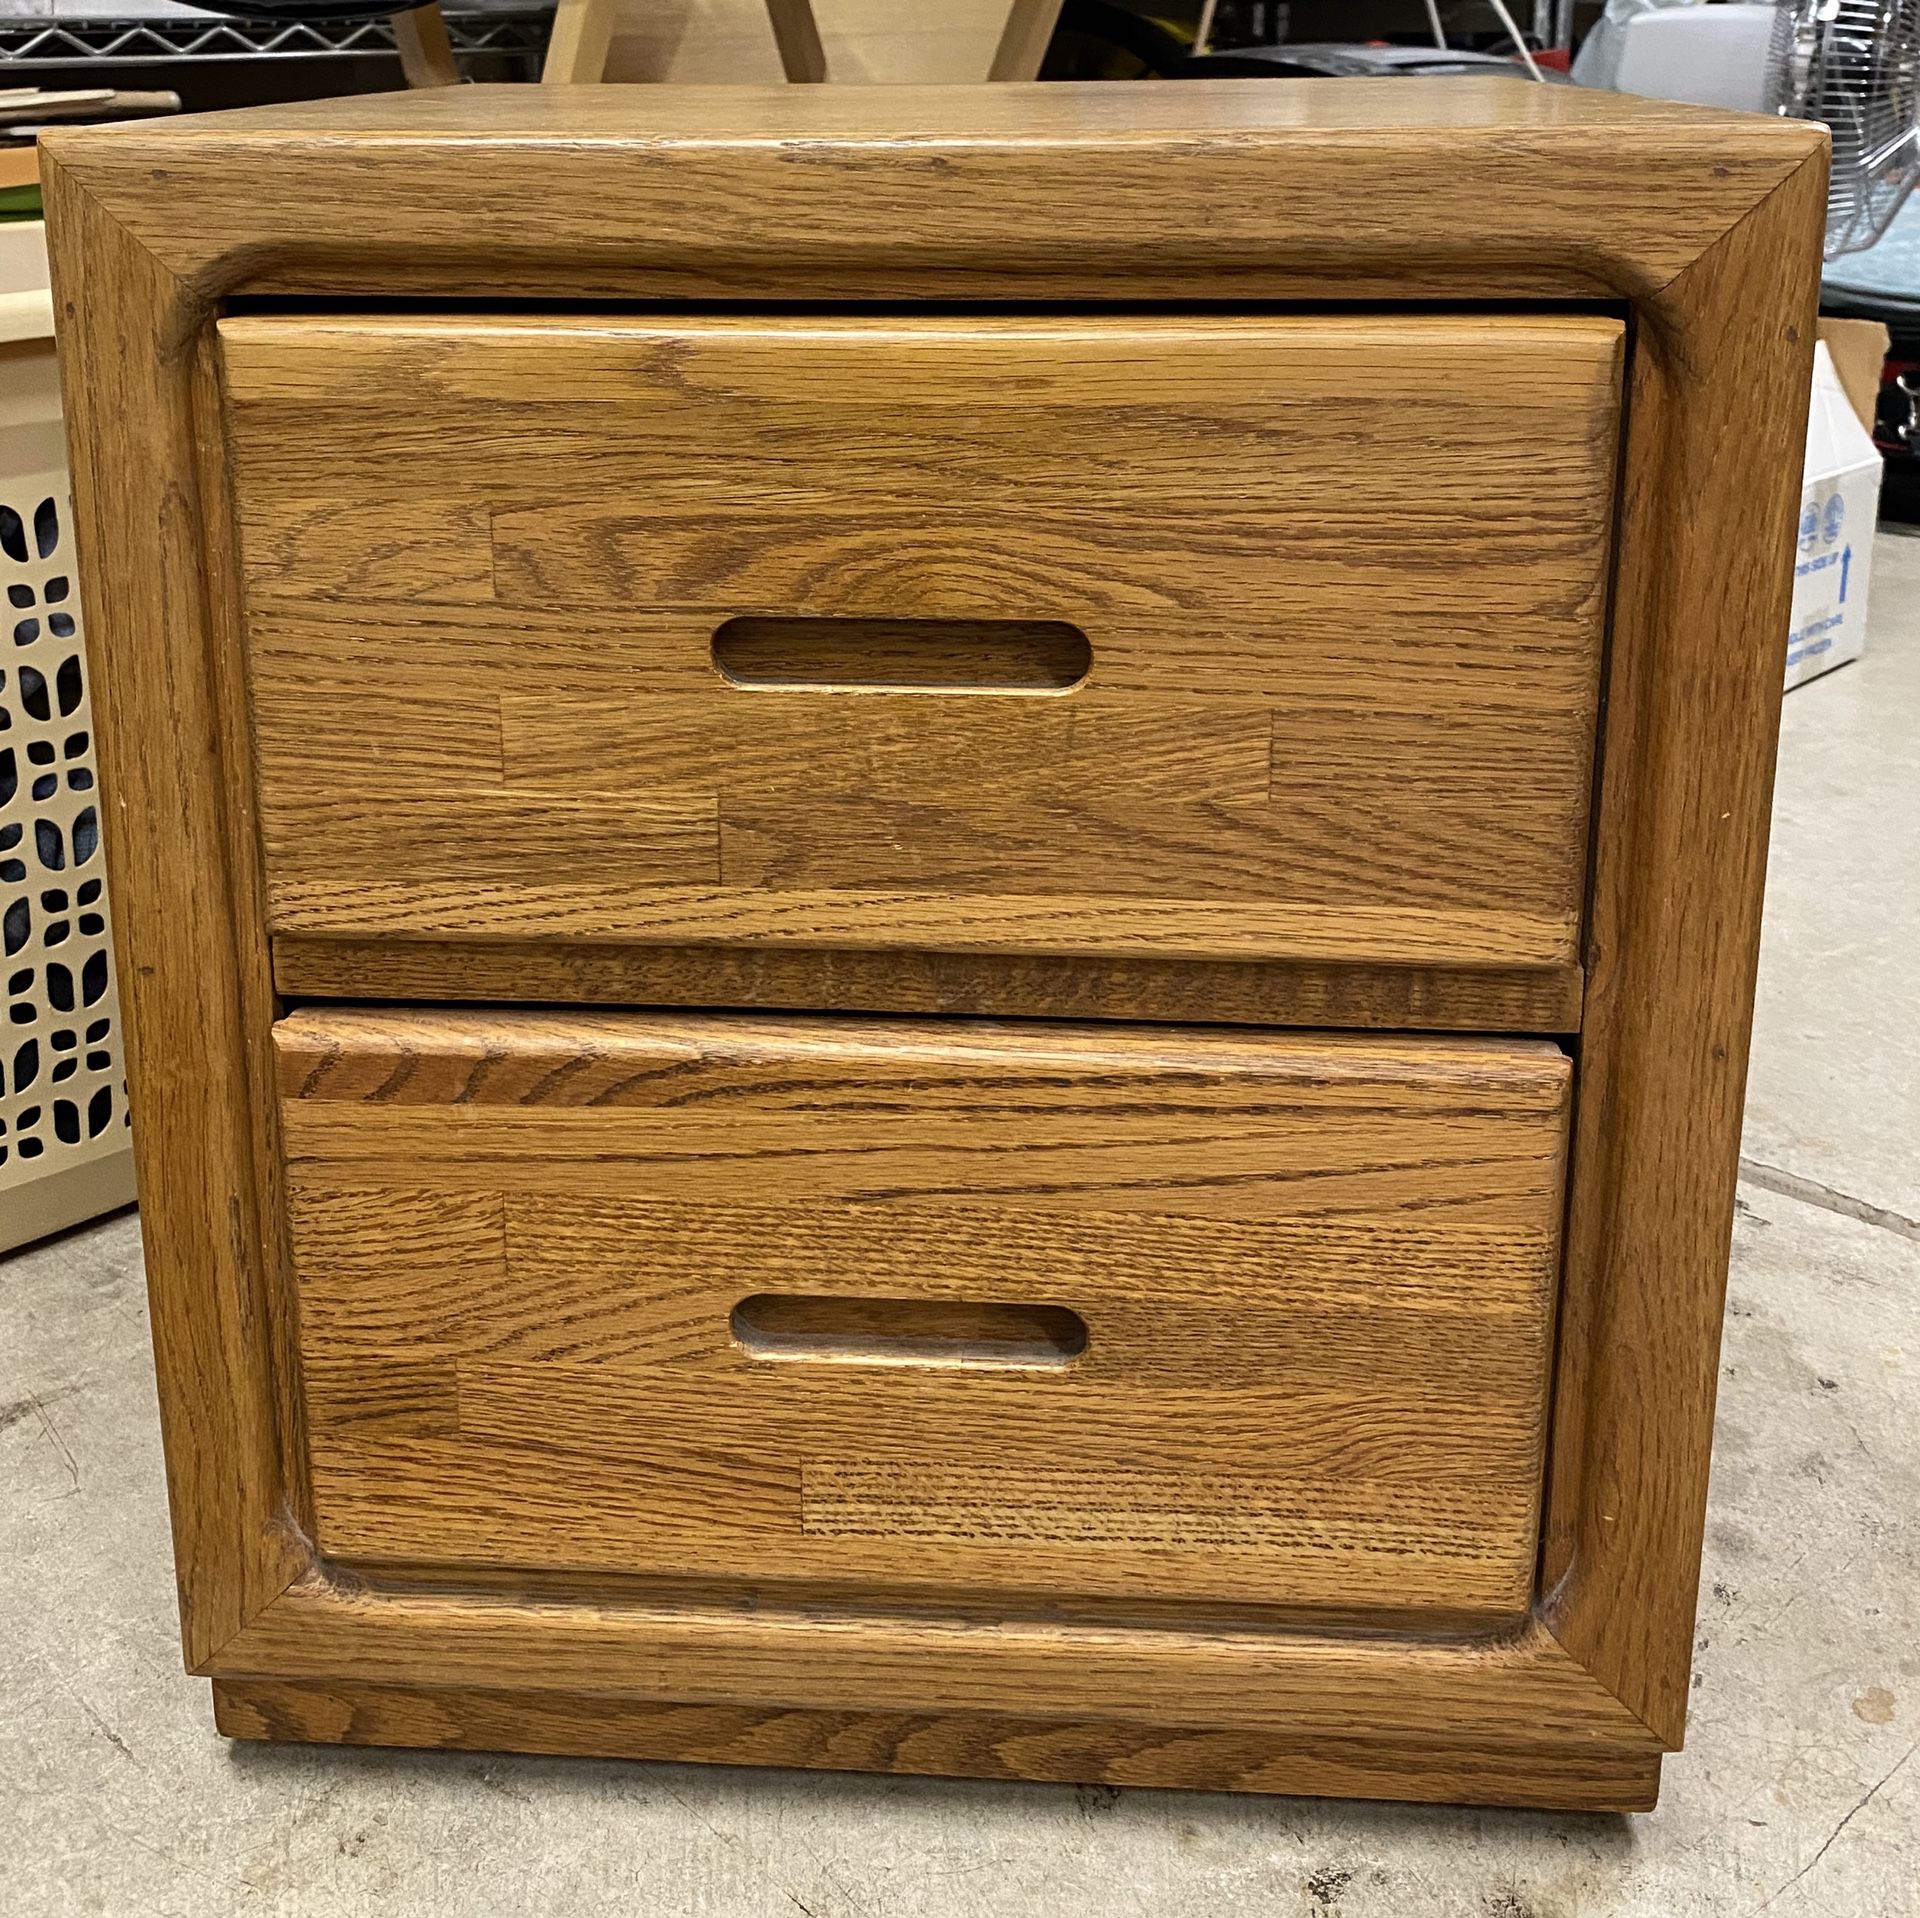 Solid Oak nightstand or side table-$15